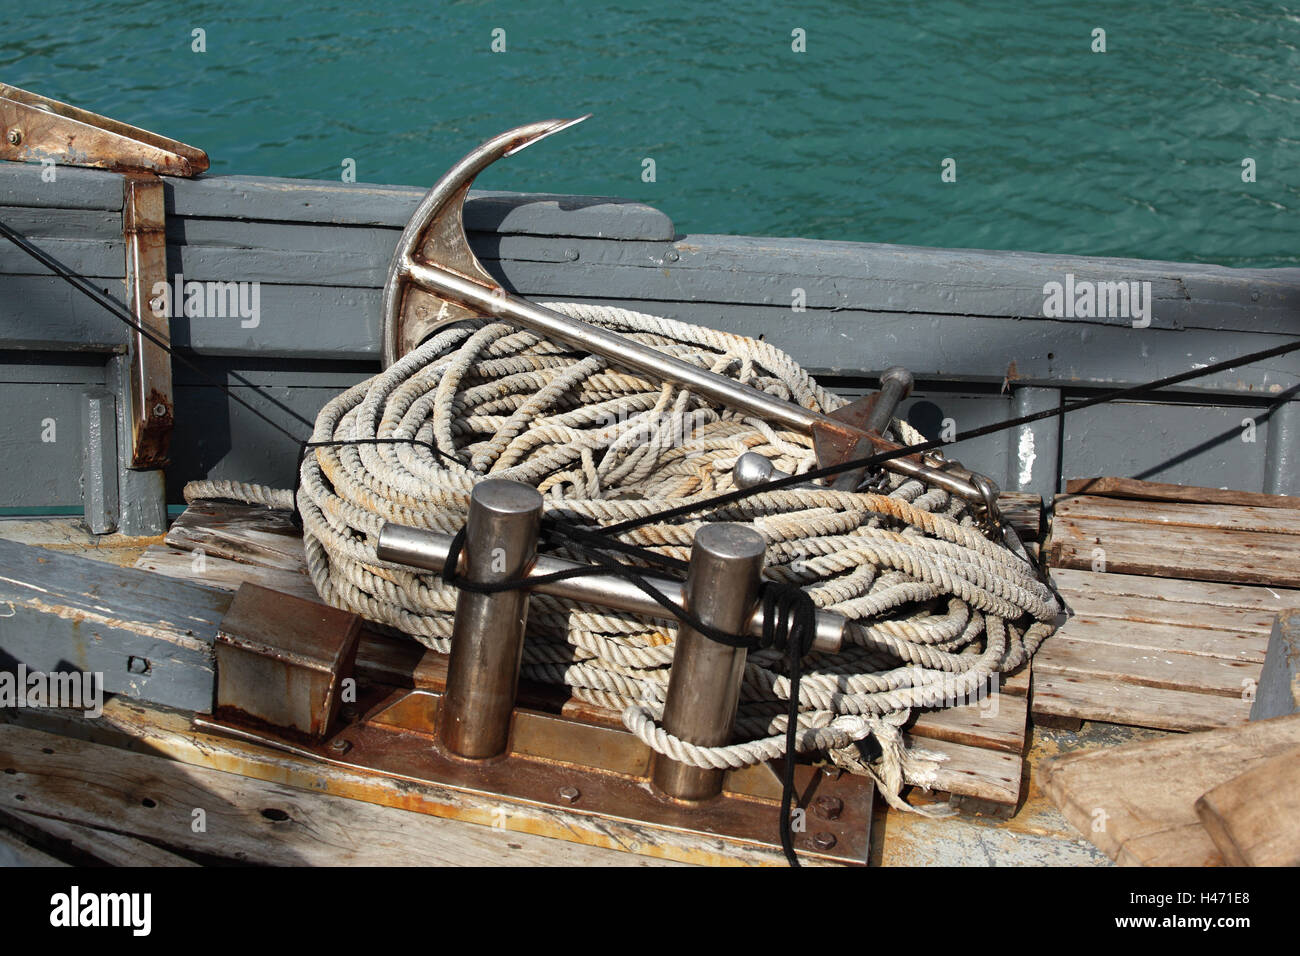 Sea, water, fishing boat, rope, anchor Stock Photo - Alamy